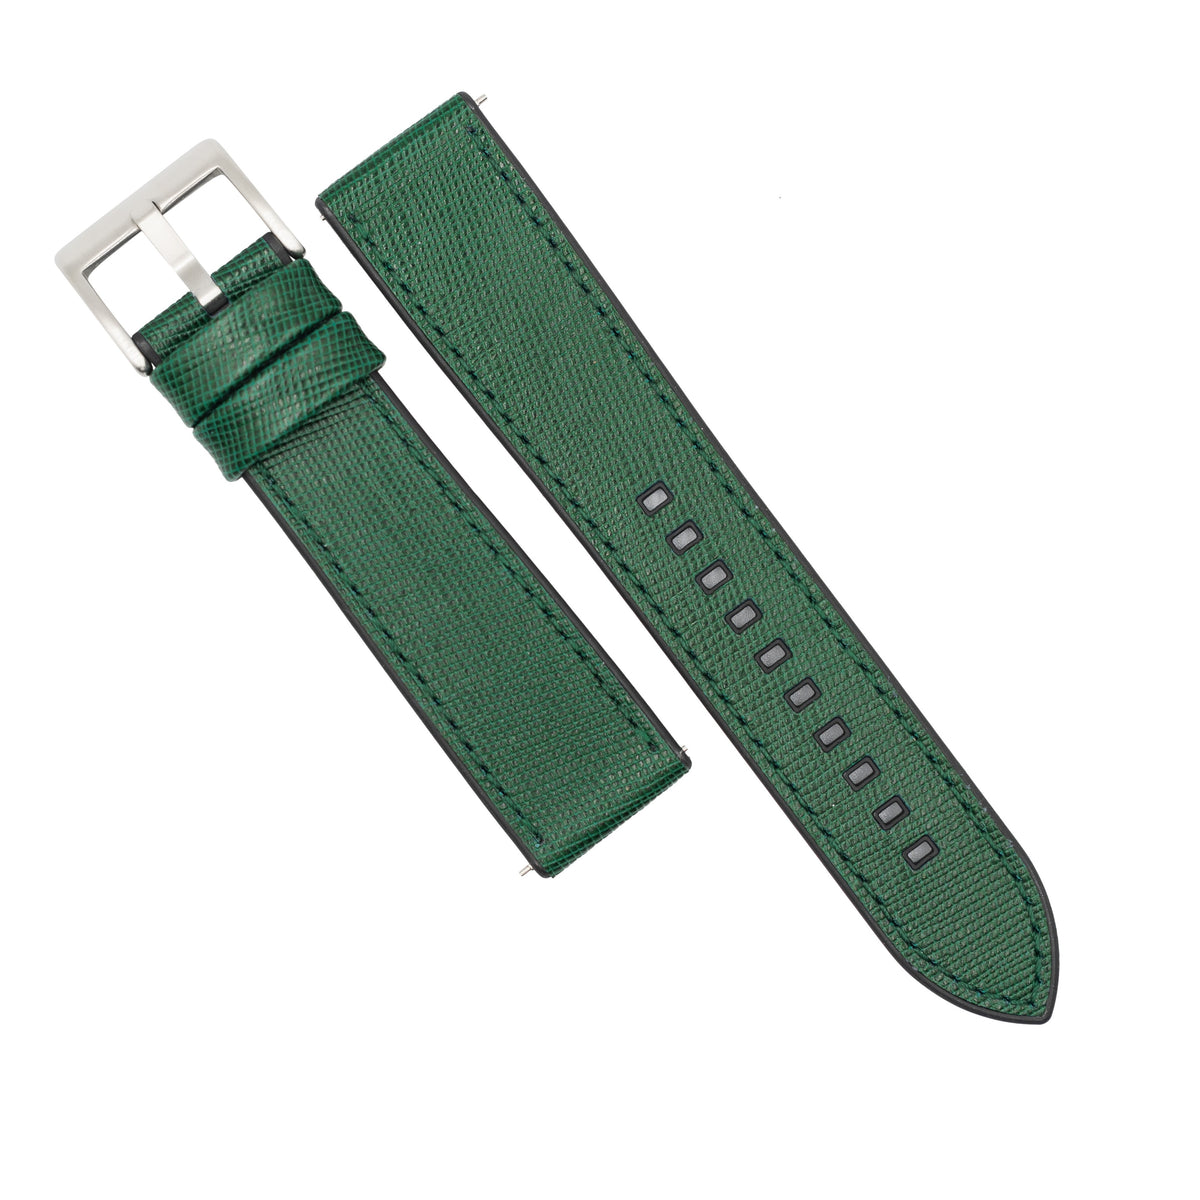 Performax Saffiano Leather FKM Rubber Hybrid Strap in Green (20mm) - Nomad Watch Works SG